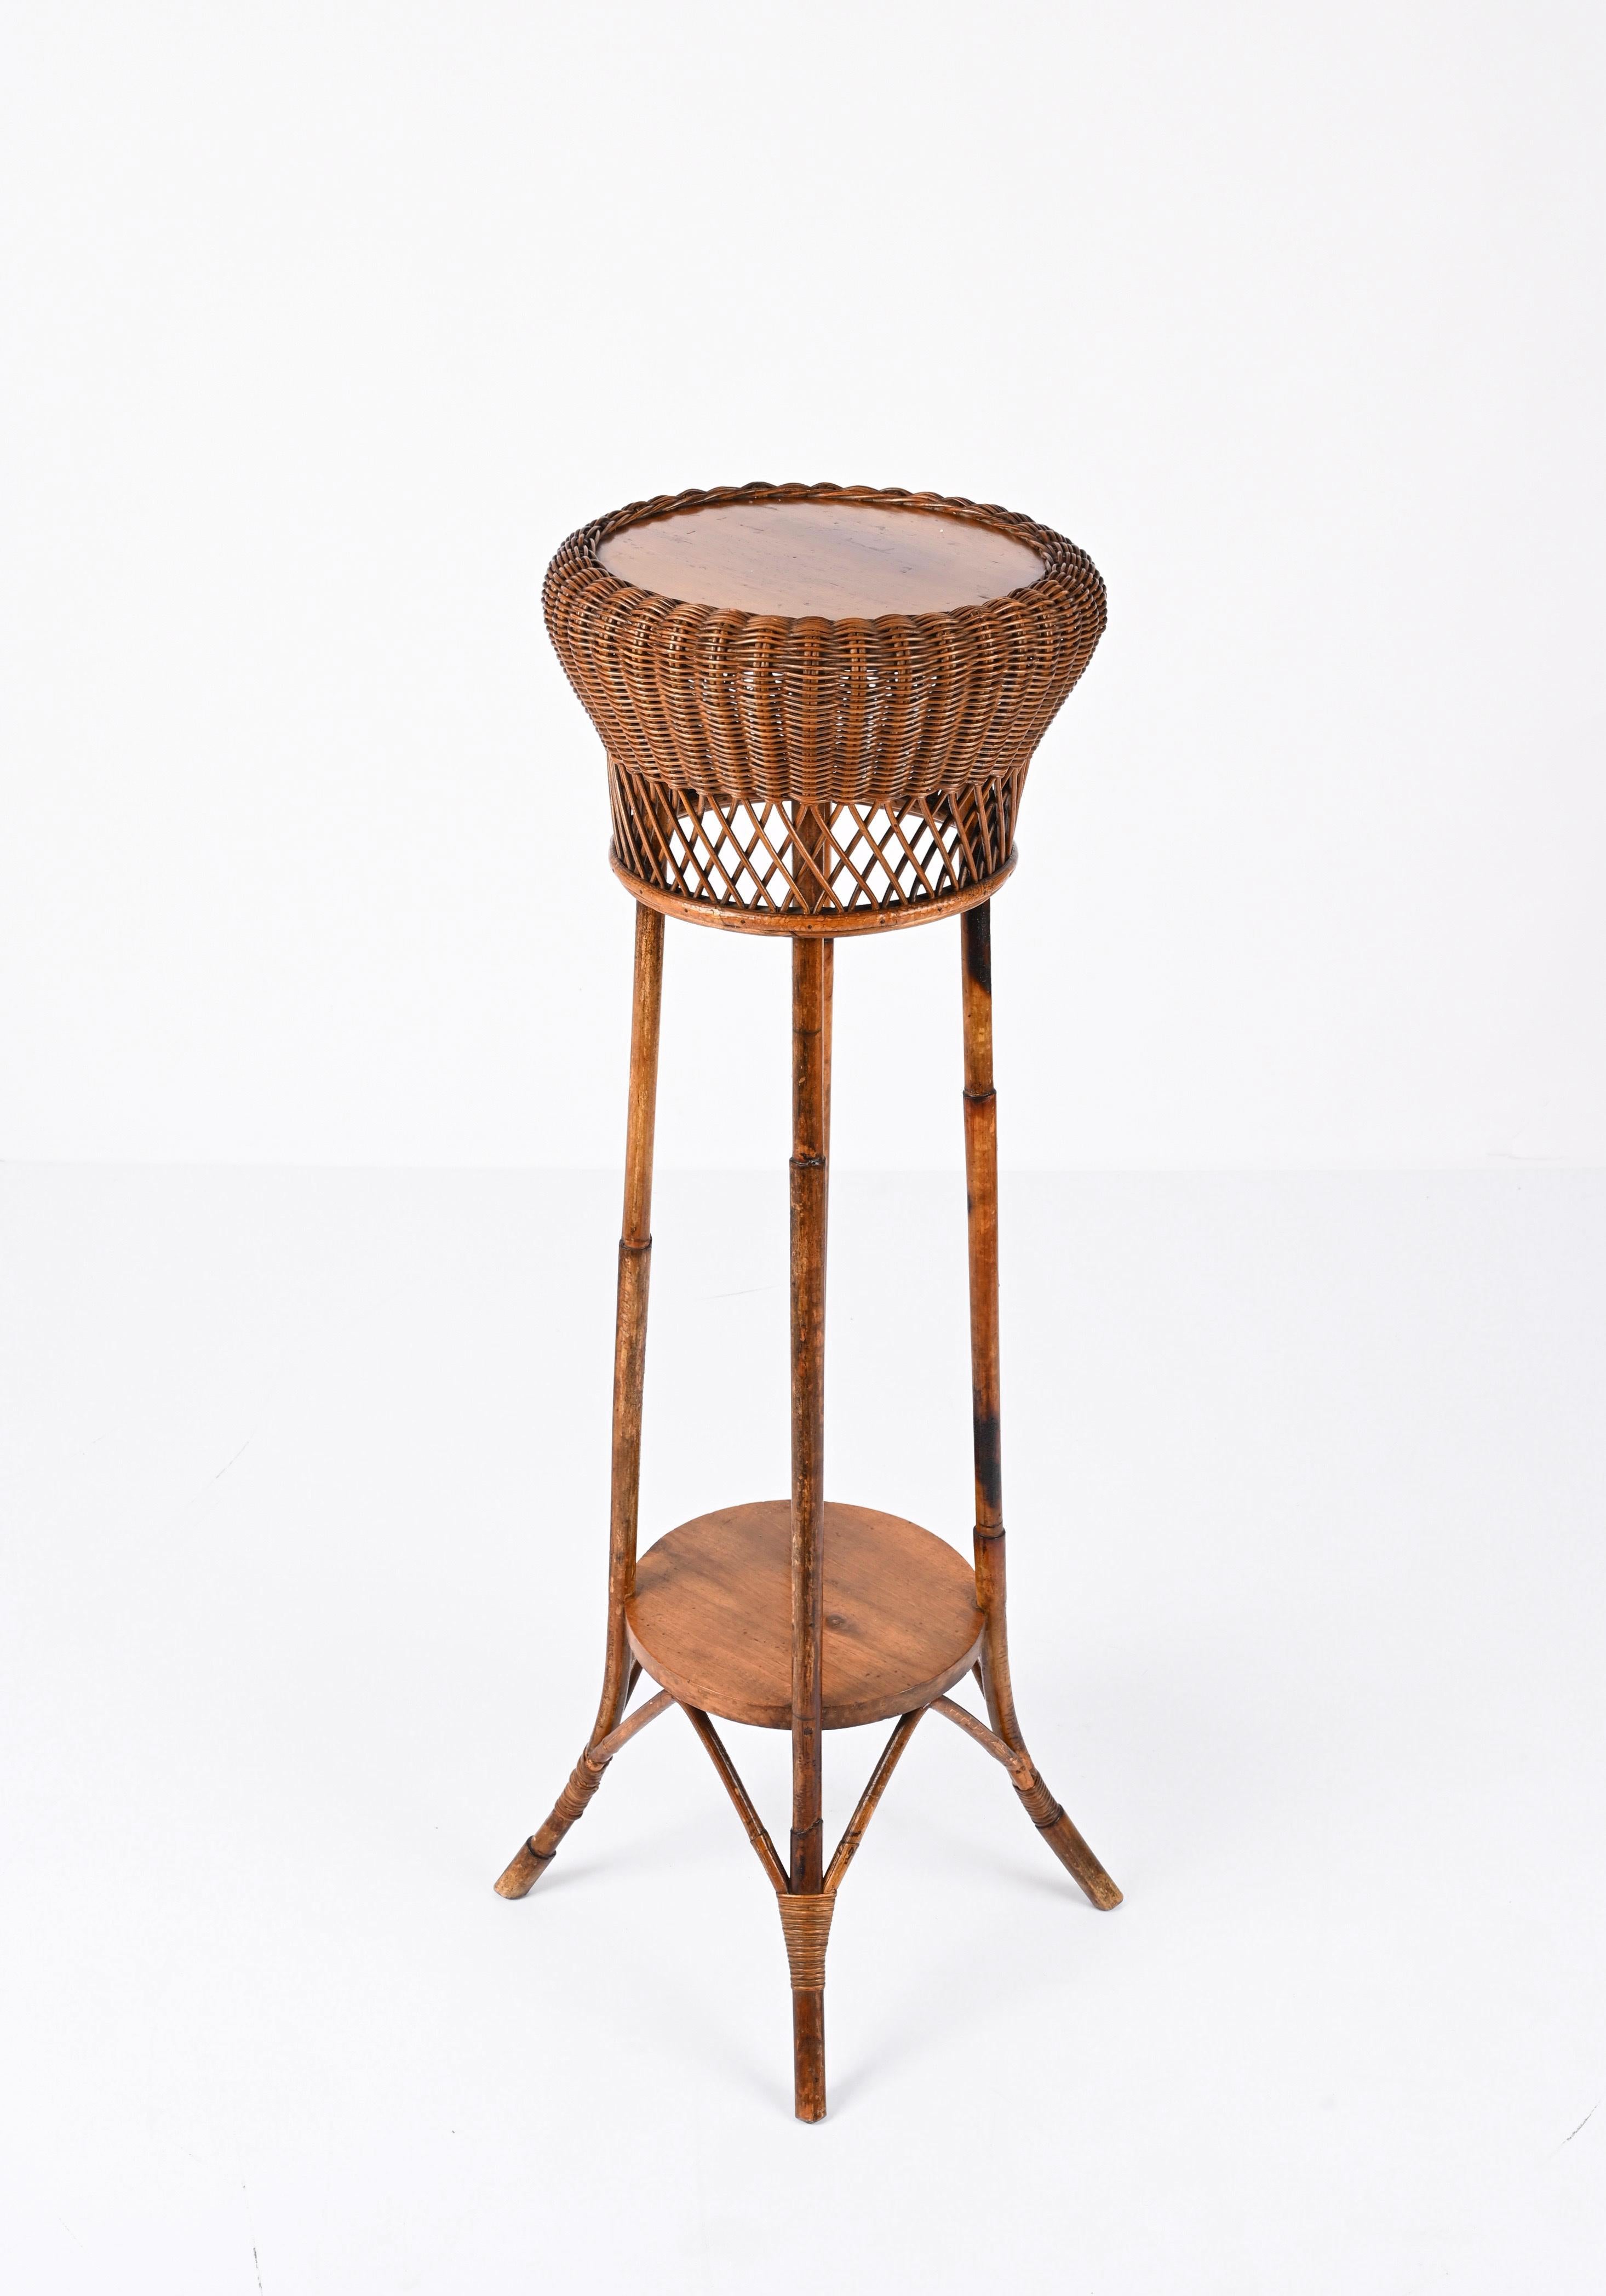 Midcentury Double-Levelled Circular Rattan and Bamboo Italian Pedestal, 1950s For Sale 2